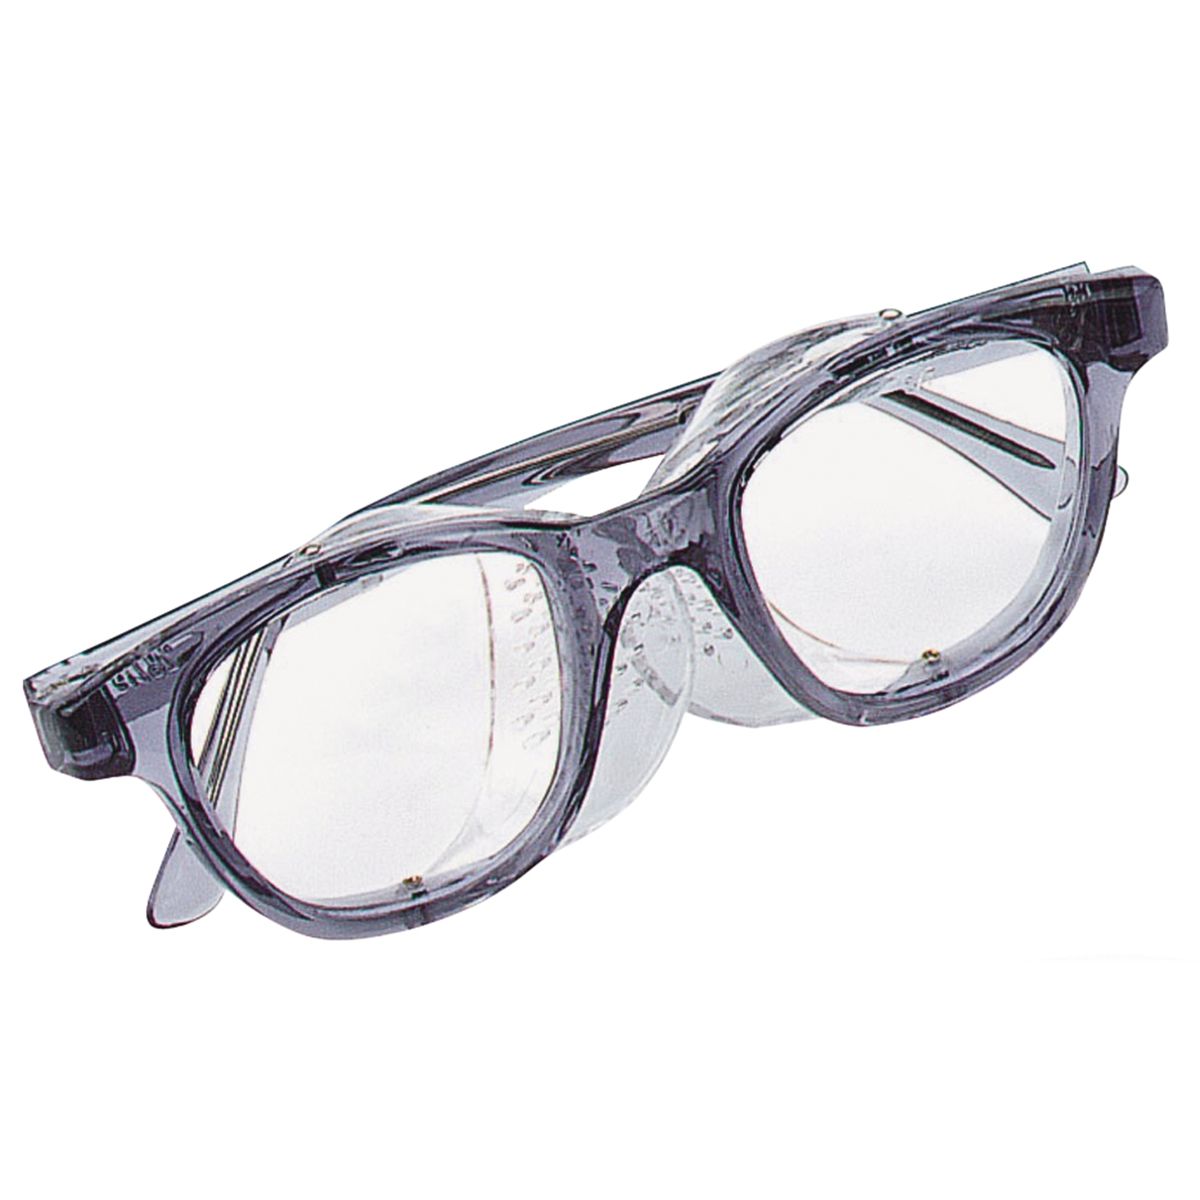 Regal Safety Glasses w Clear Lens